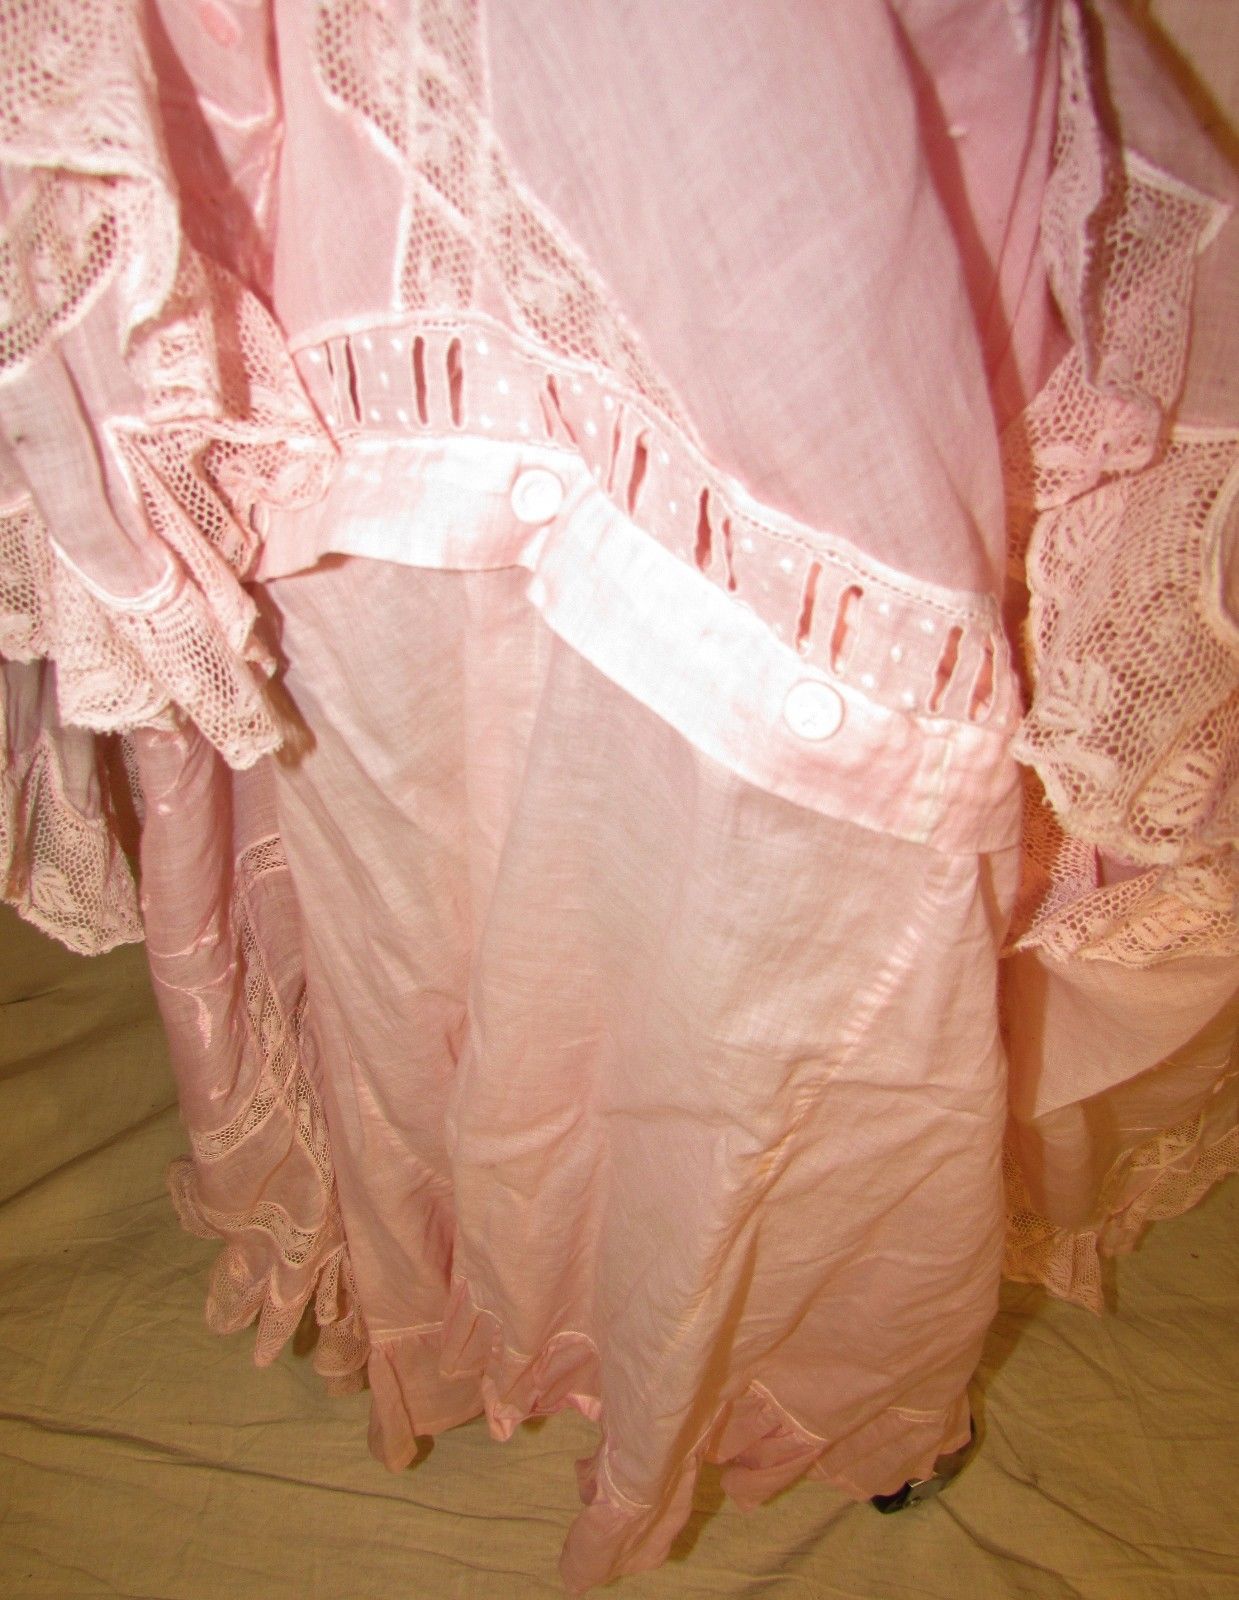 All The Pretty Dresses: Early 20th Century Pink Petticoat